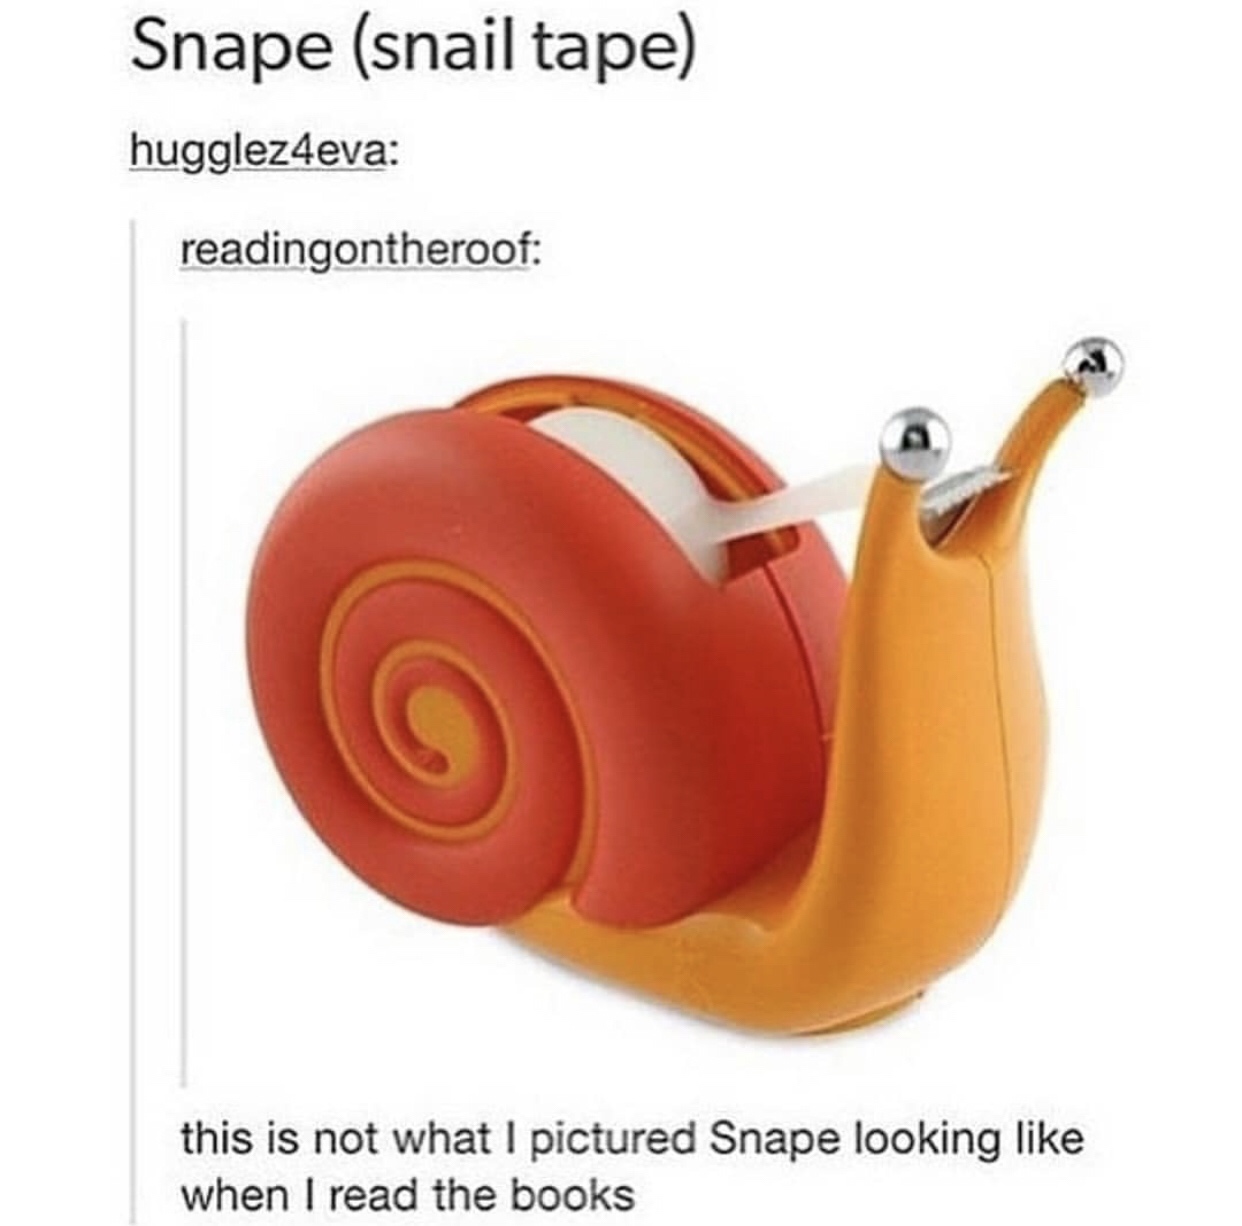 snape snail tape - Snape snail tape hugglez4eva readingontheroof this is not what I pictured Snape looking when I read the books